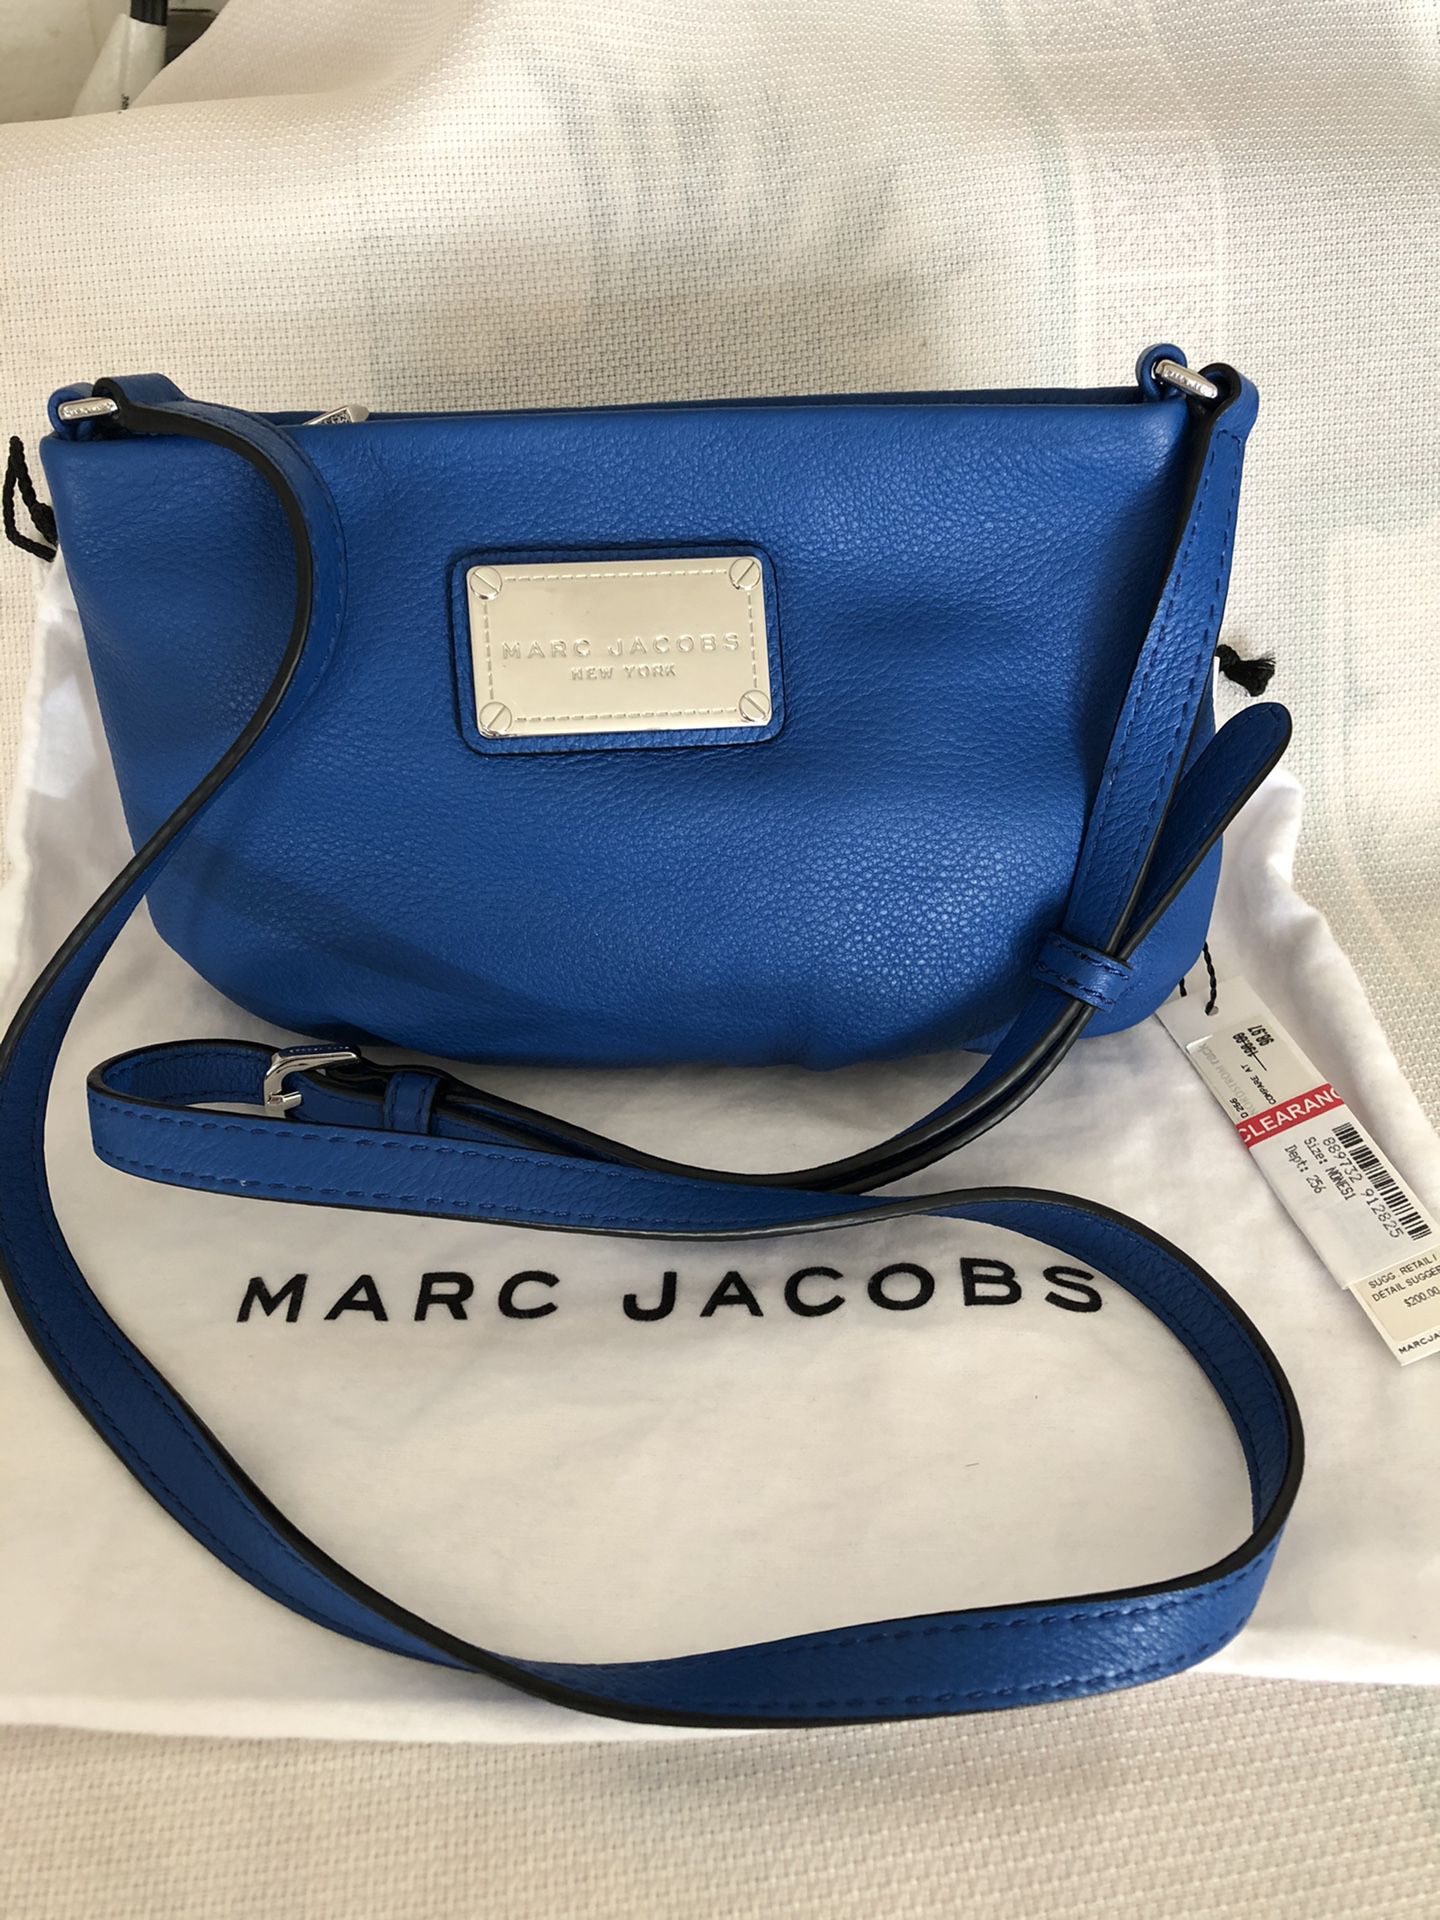 Marc by Marc Jacobs Classic Q Percy Crossbody Bag for Sale in Peabody, MA -  OfferUp